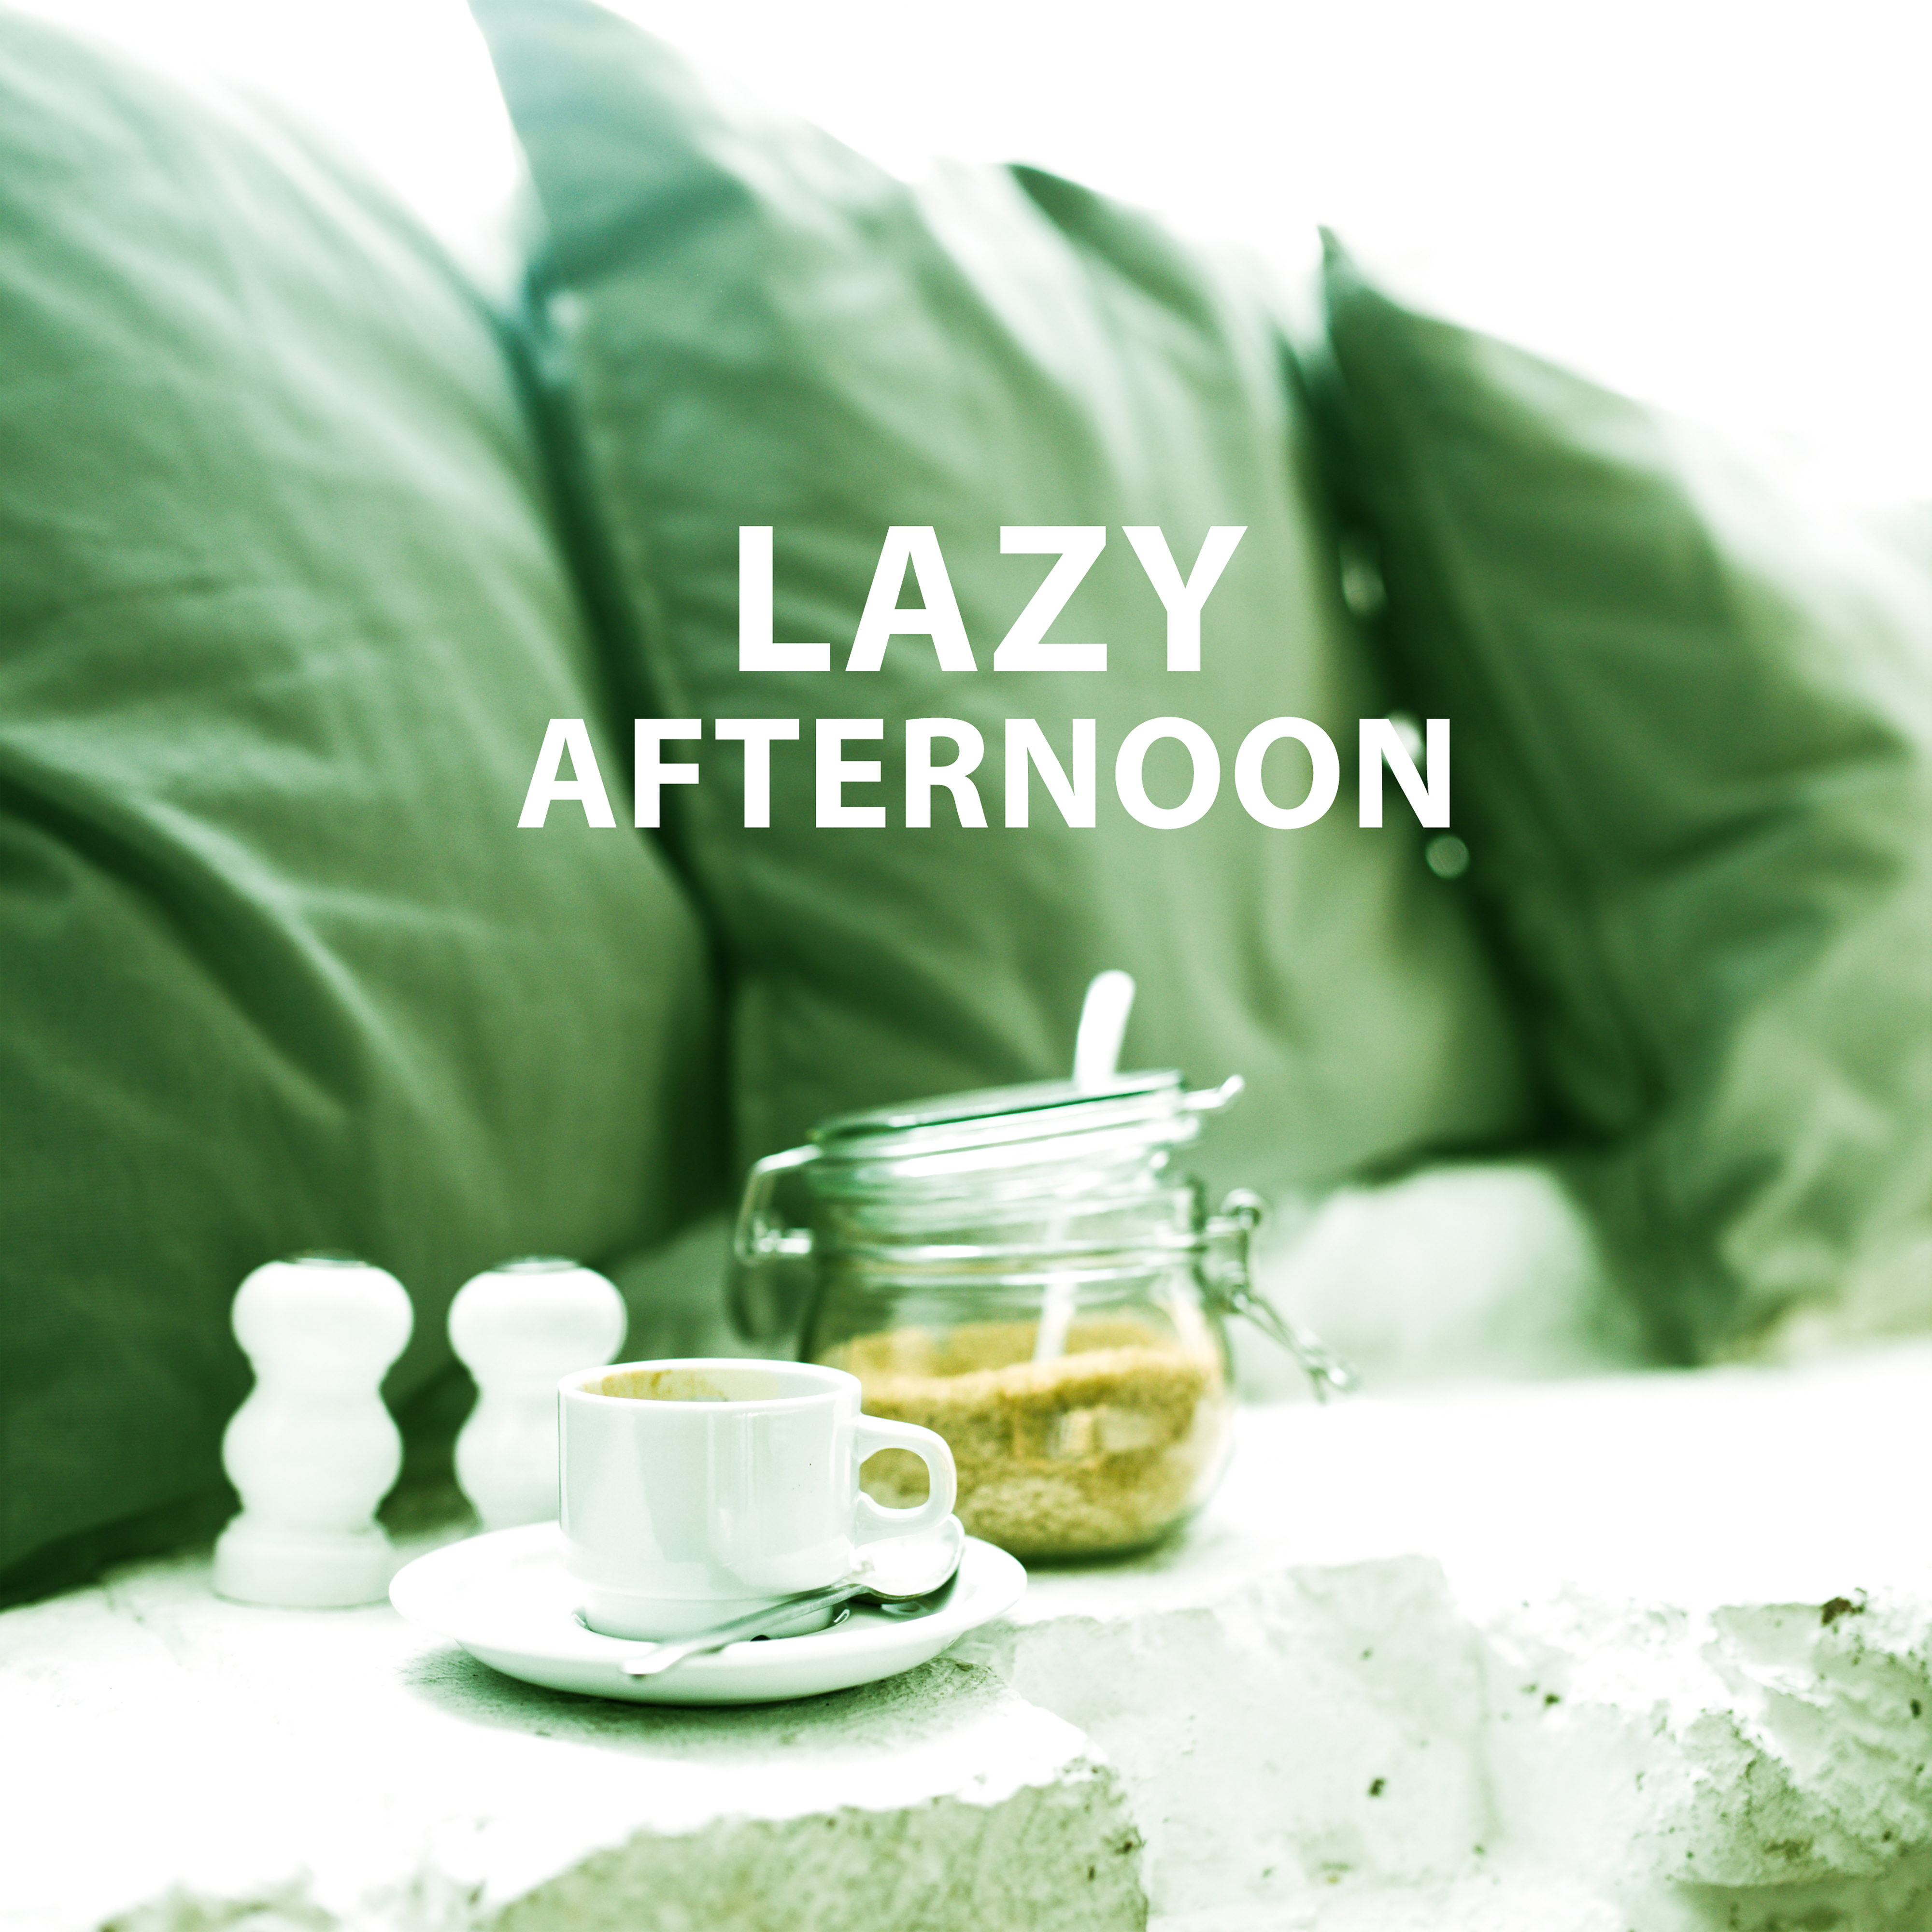 Lazy Afternoon – Relaxing Music, Calming Sounds of Nature, Rest, Relax After Work, New Age Music